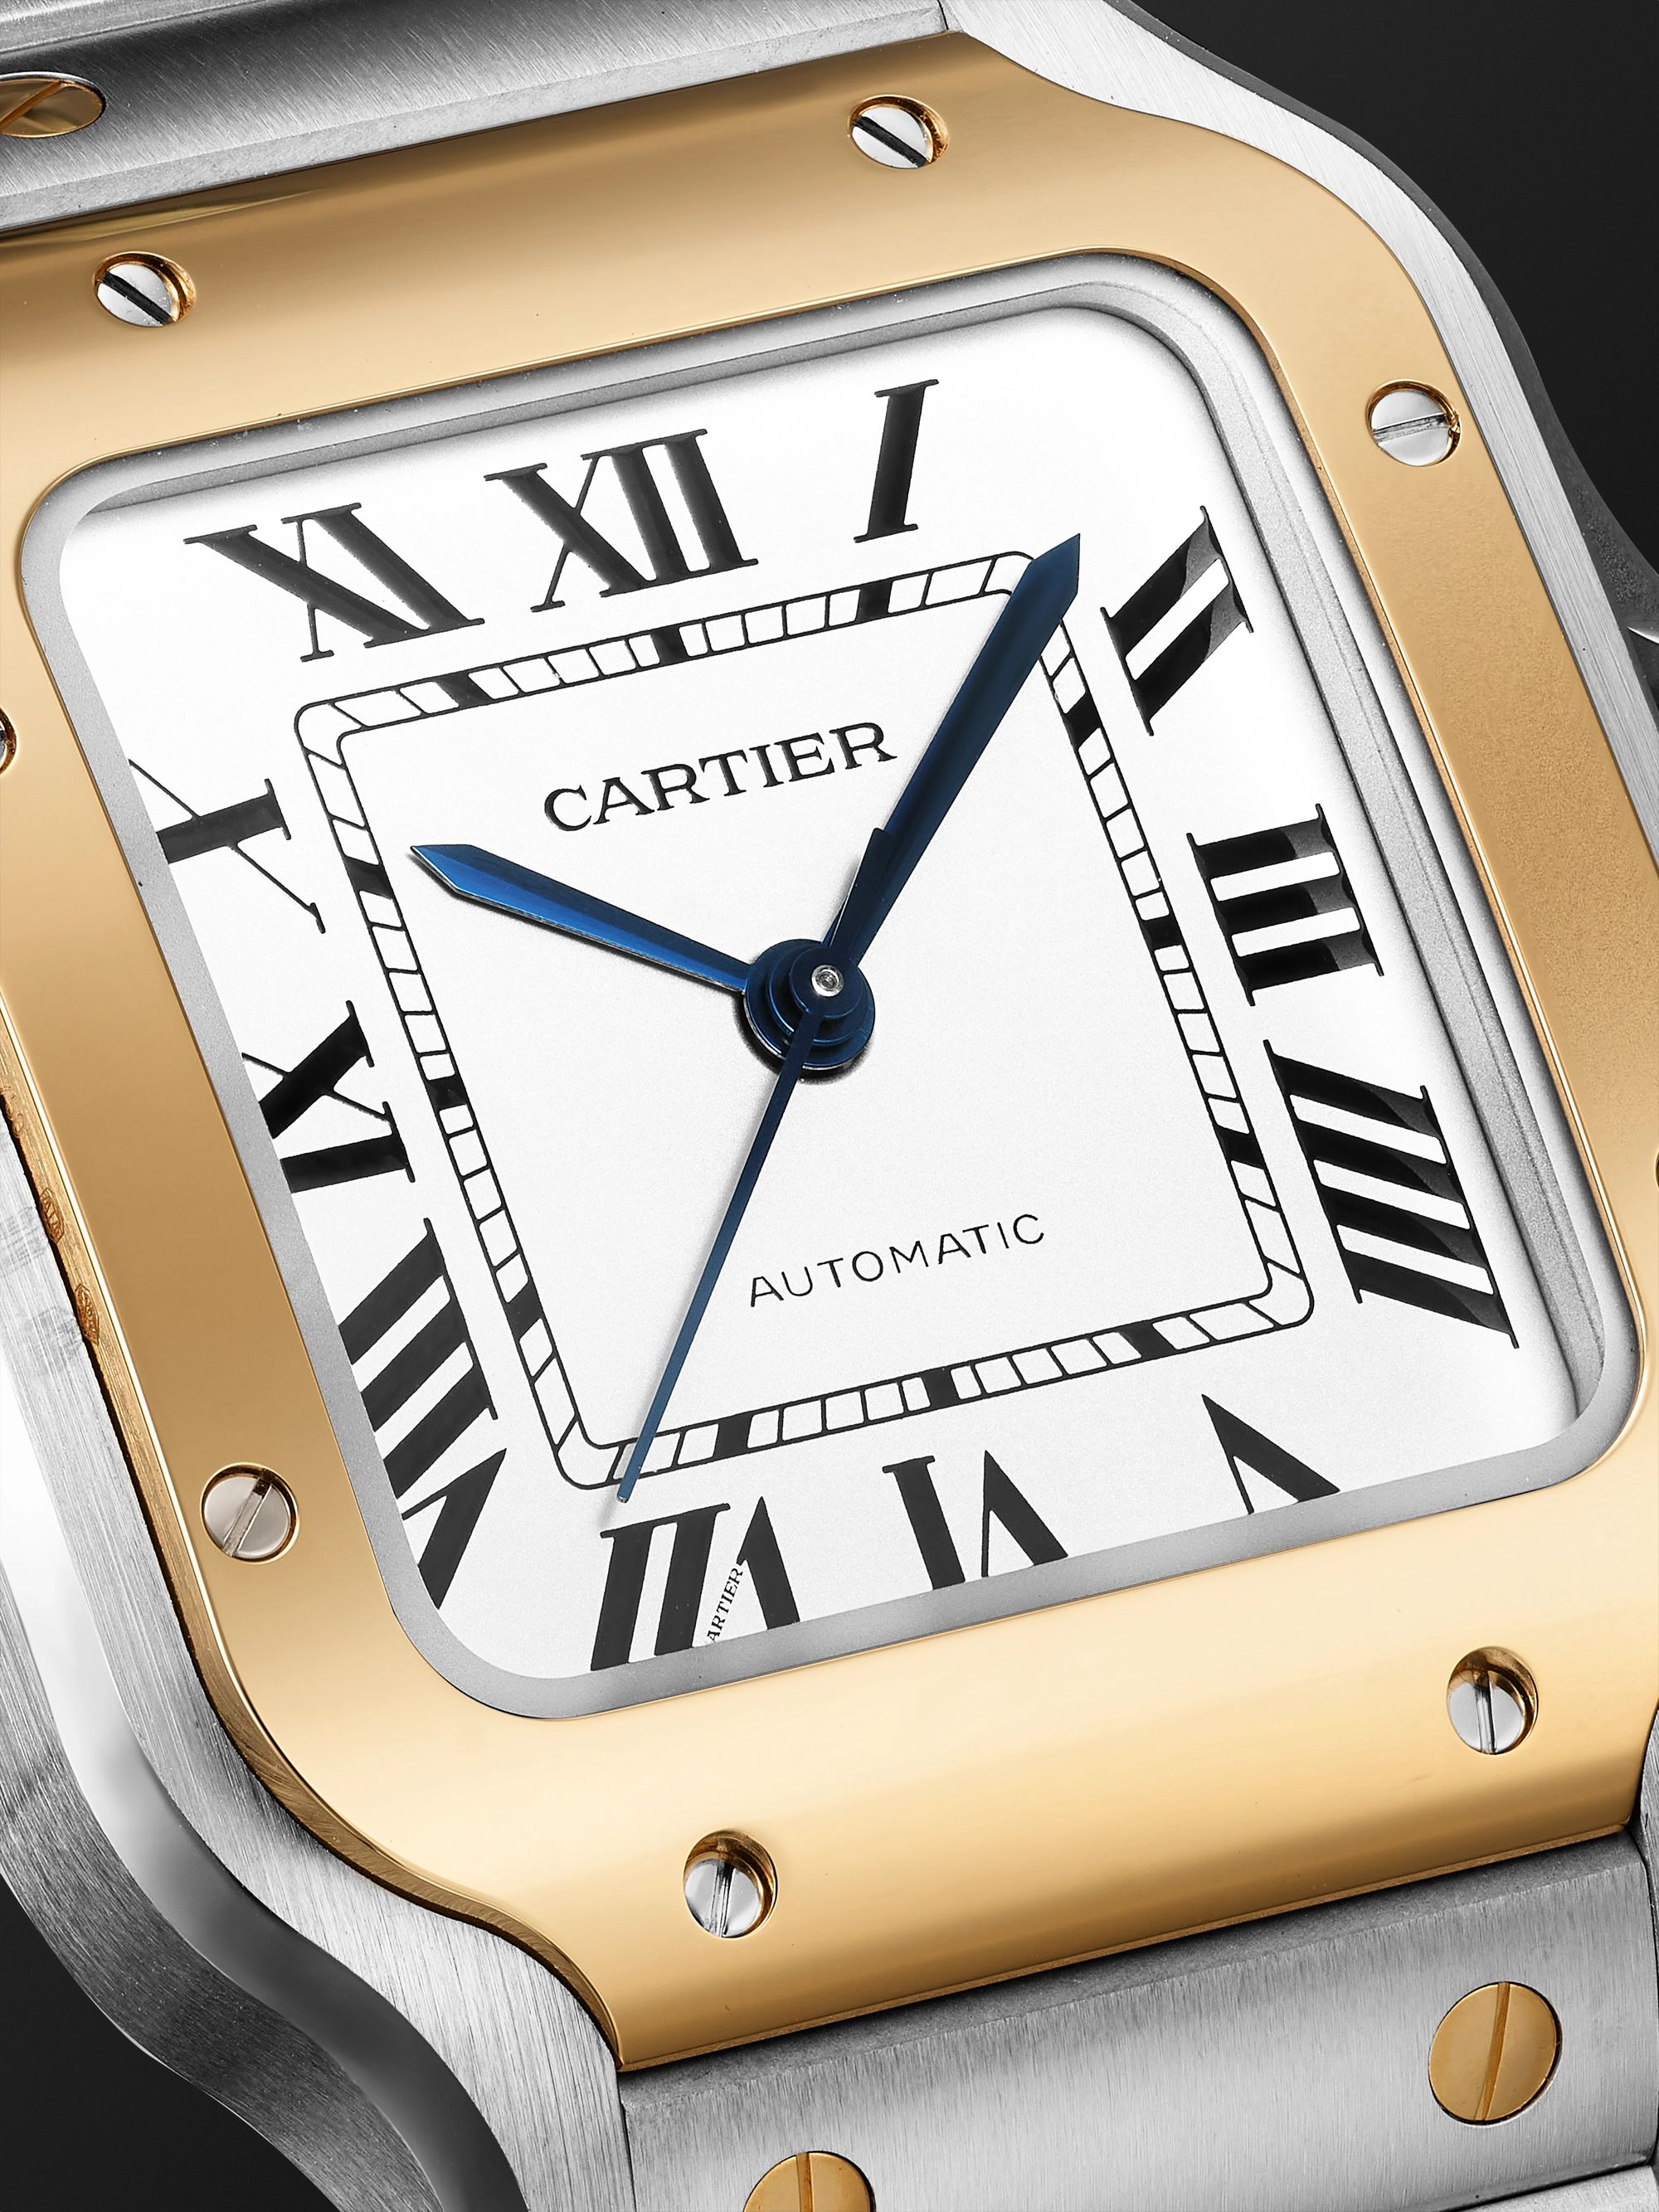 CARTIER Santos de Cartier Automatic 35.1mm Interchangeable 18-Karat Gold, Stainless Steel and Leather Watch, Ref. No. W2SA0016